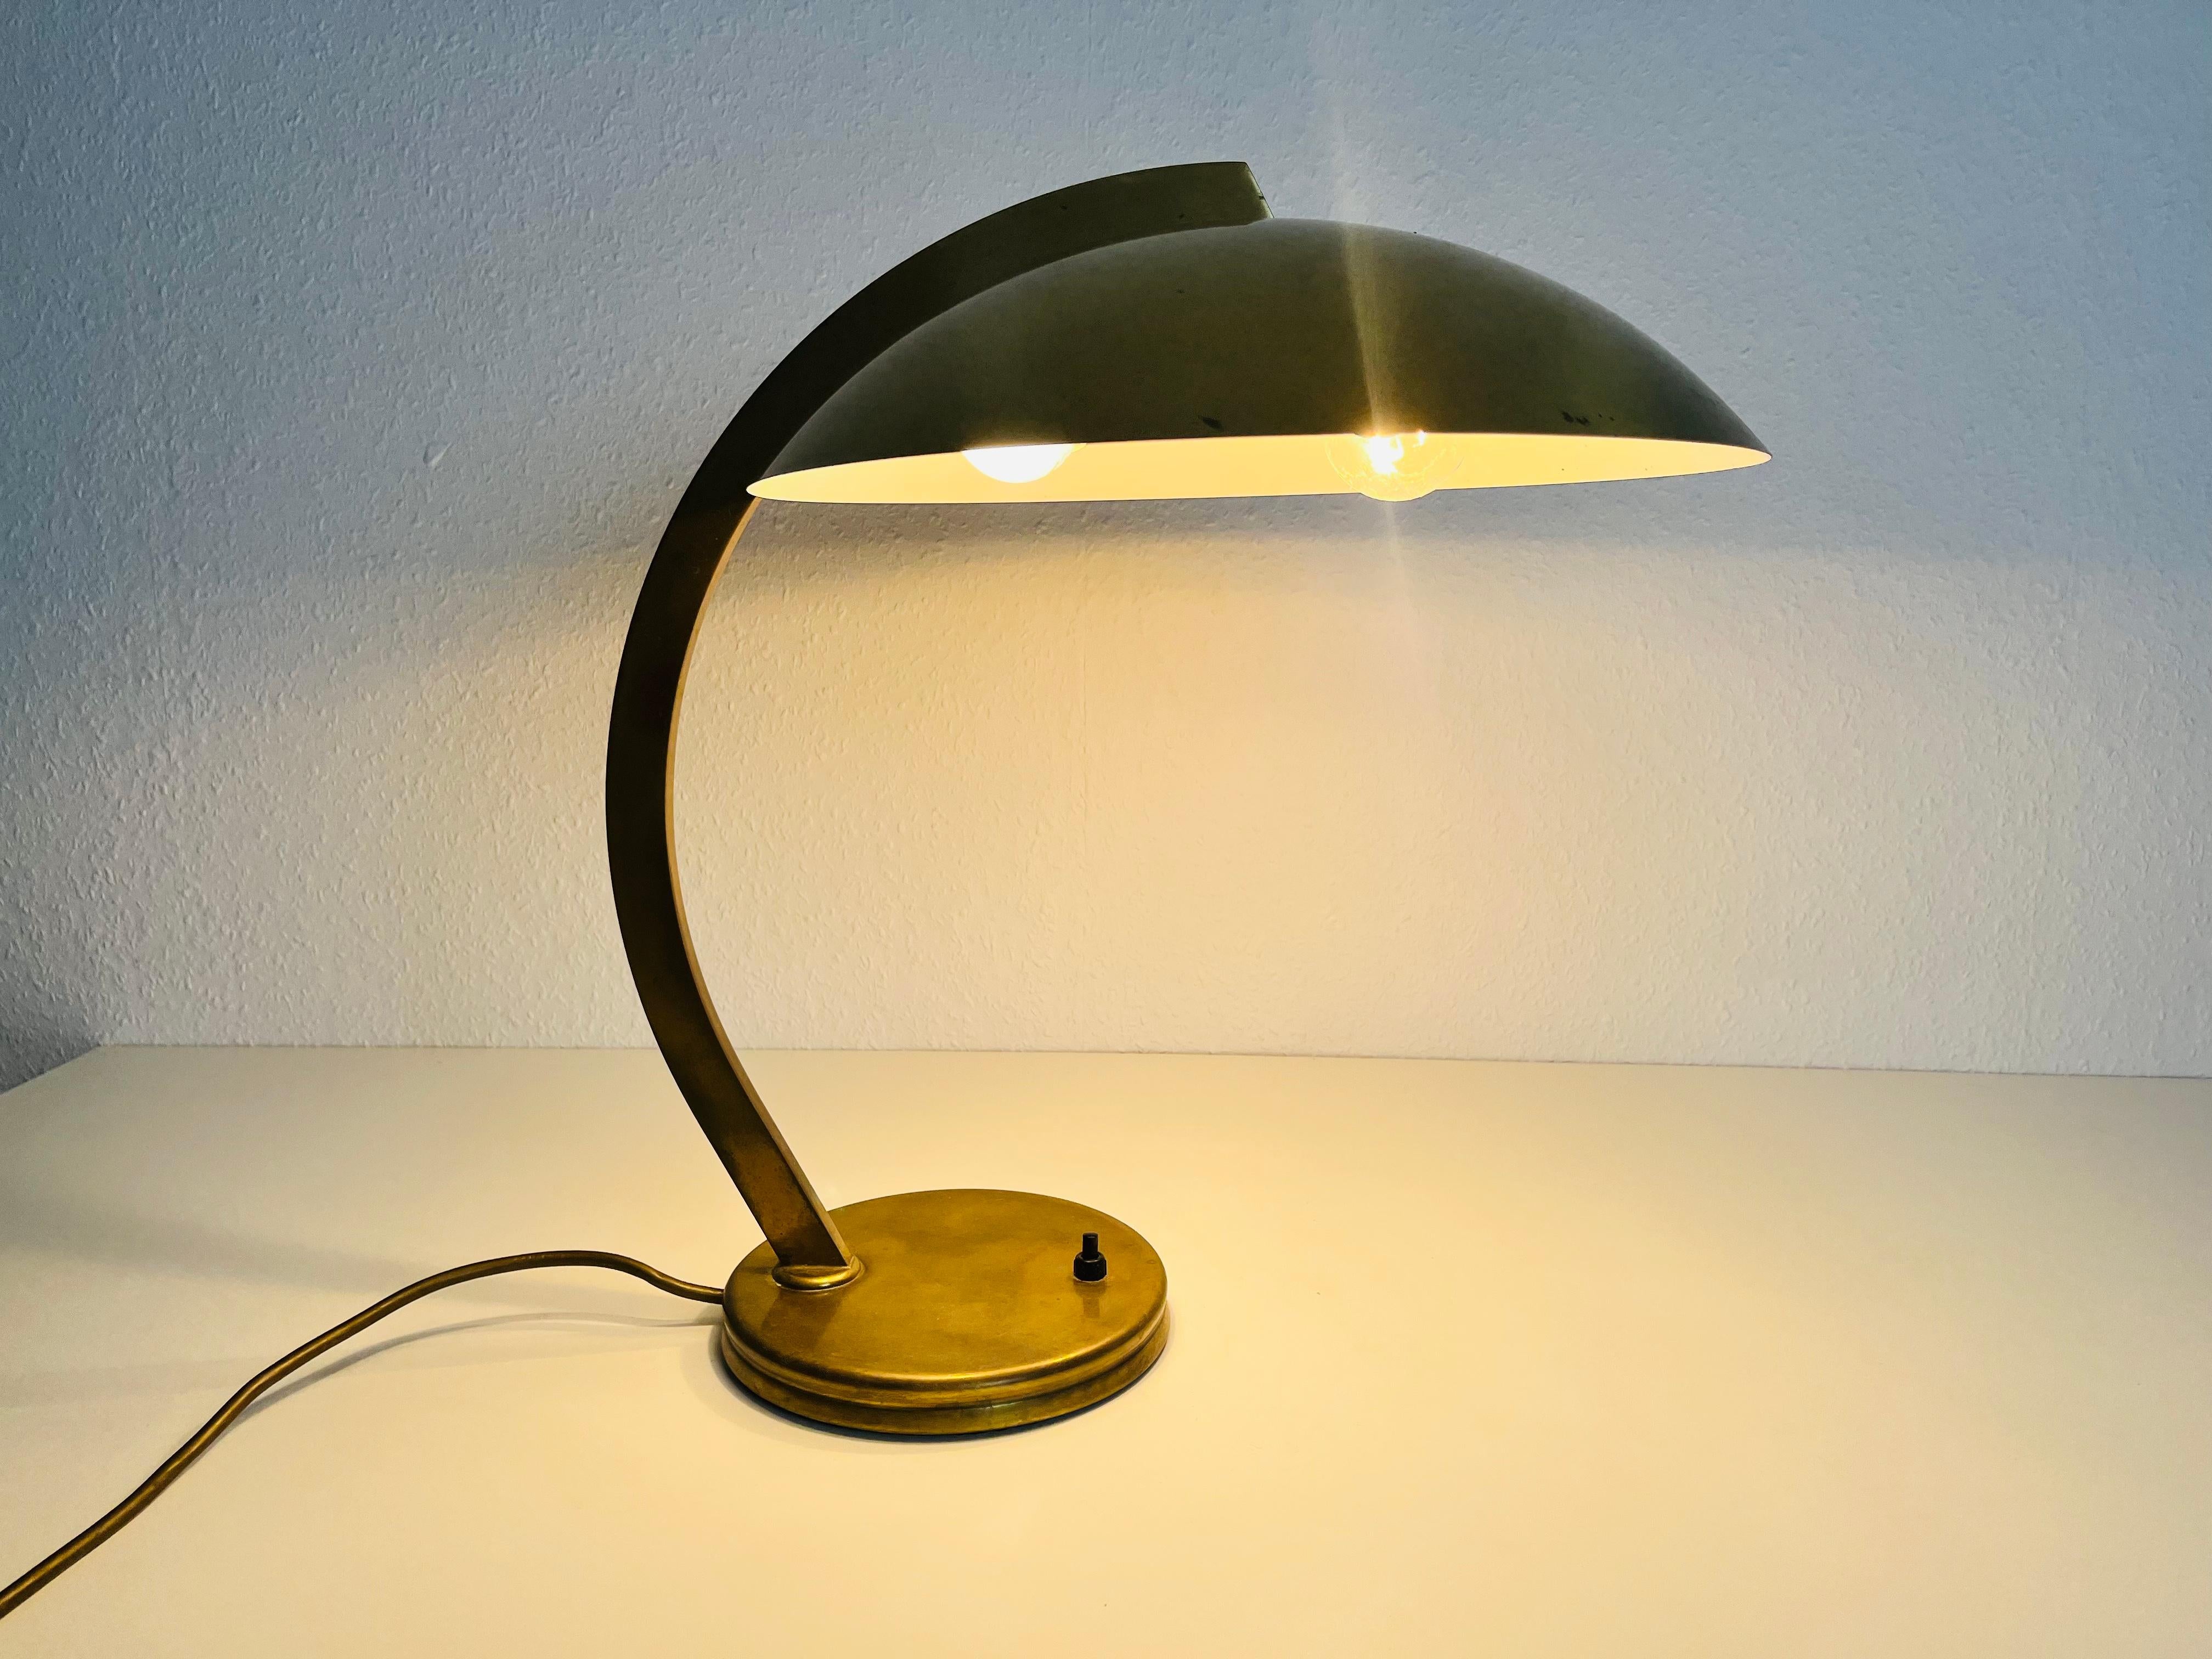 Hillebrand Midcentury Full Brass Table Lamp, 1960s, Germany For Sale 7